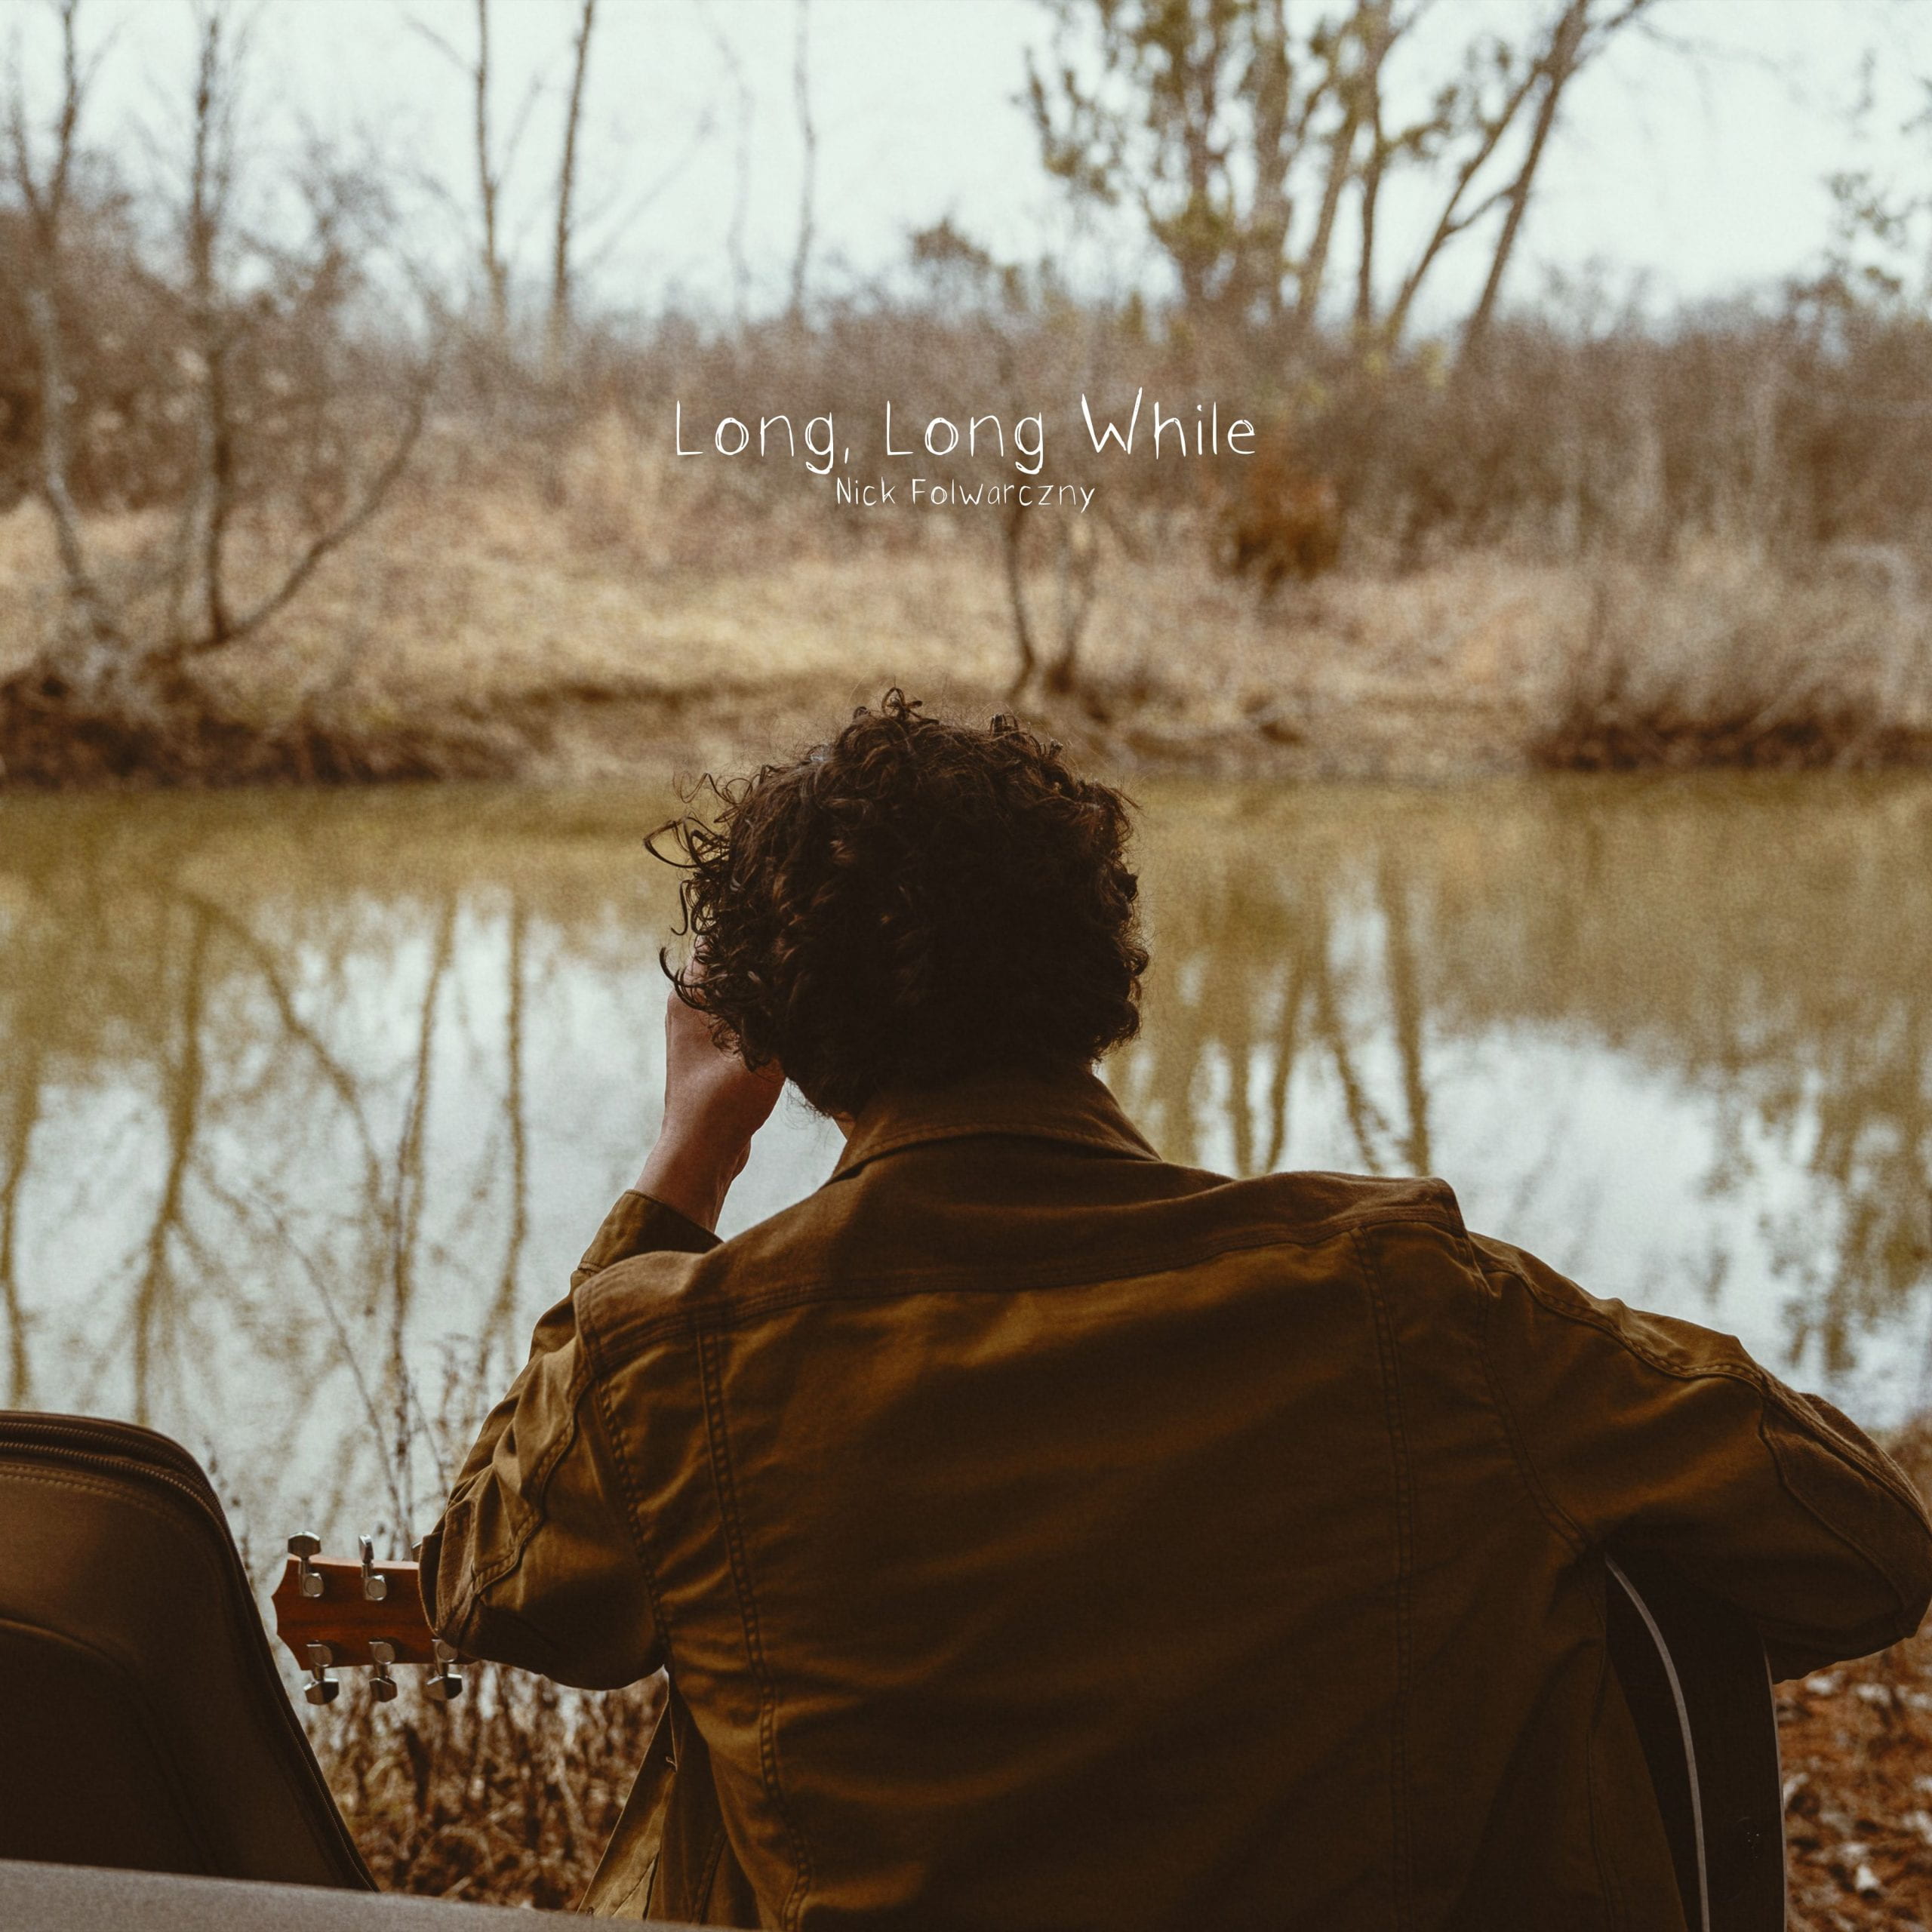 The album cover for Ohio State student and self-made musician Nick Folwarczny’s newest single, which is titled "Long, Long While" and was released on March 20. Credit: William Wark